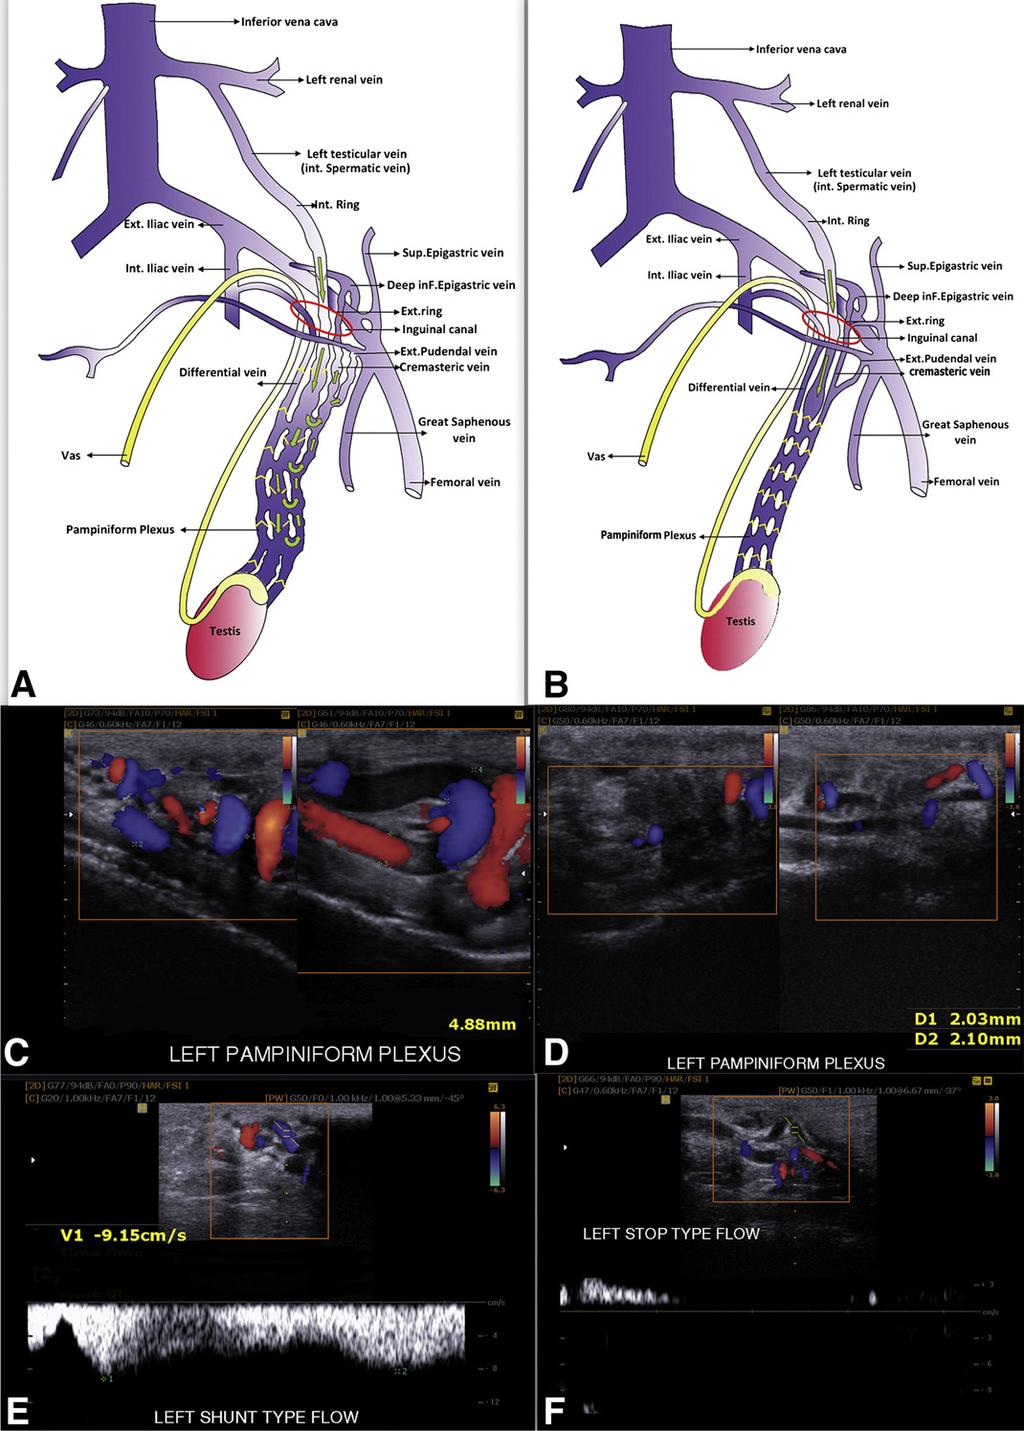 FIGURE 1 (A) Schematic anatomy of the shunt-type varicocele shows incompetent valves and shunting through communicating veins, whereas in (B) stop-type varicocele the reflux in the spermatic vein is